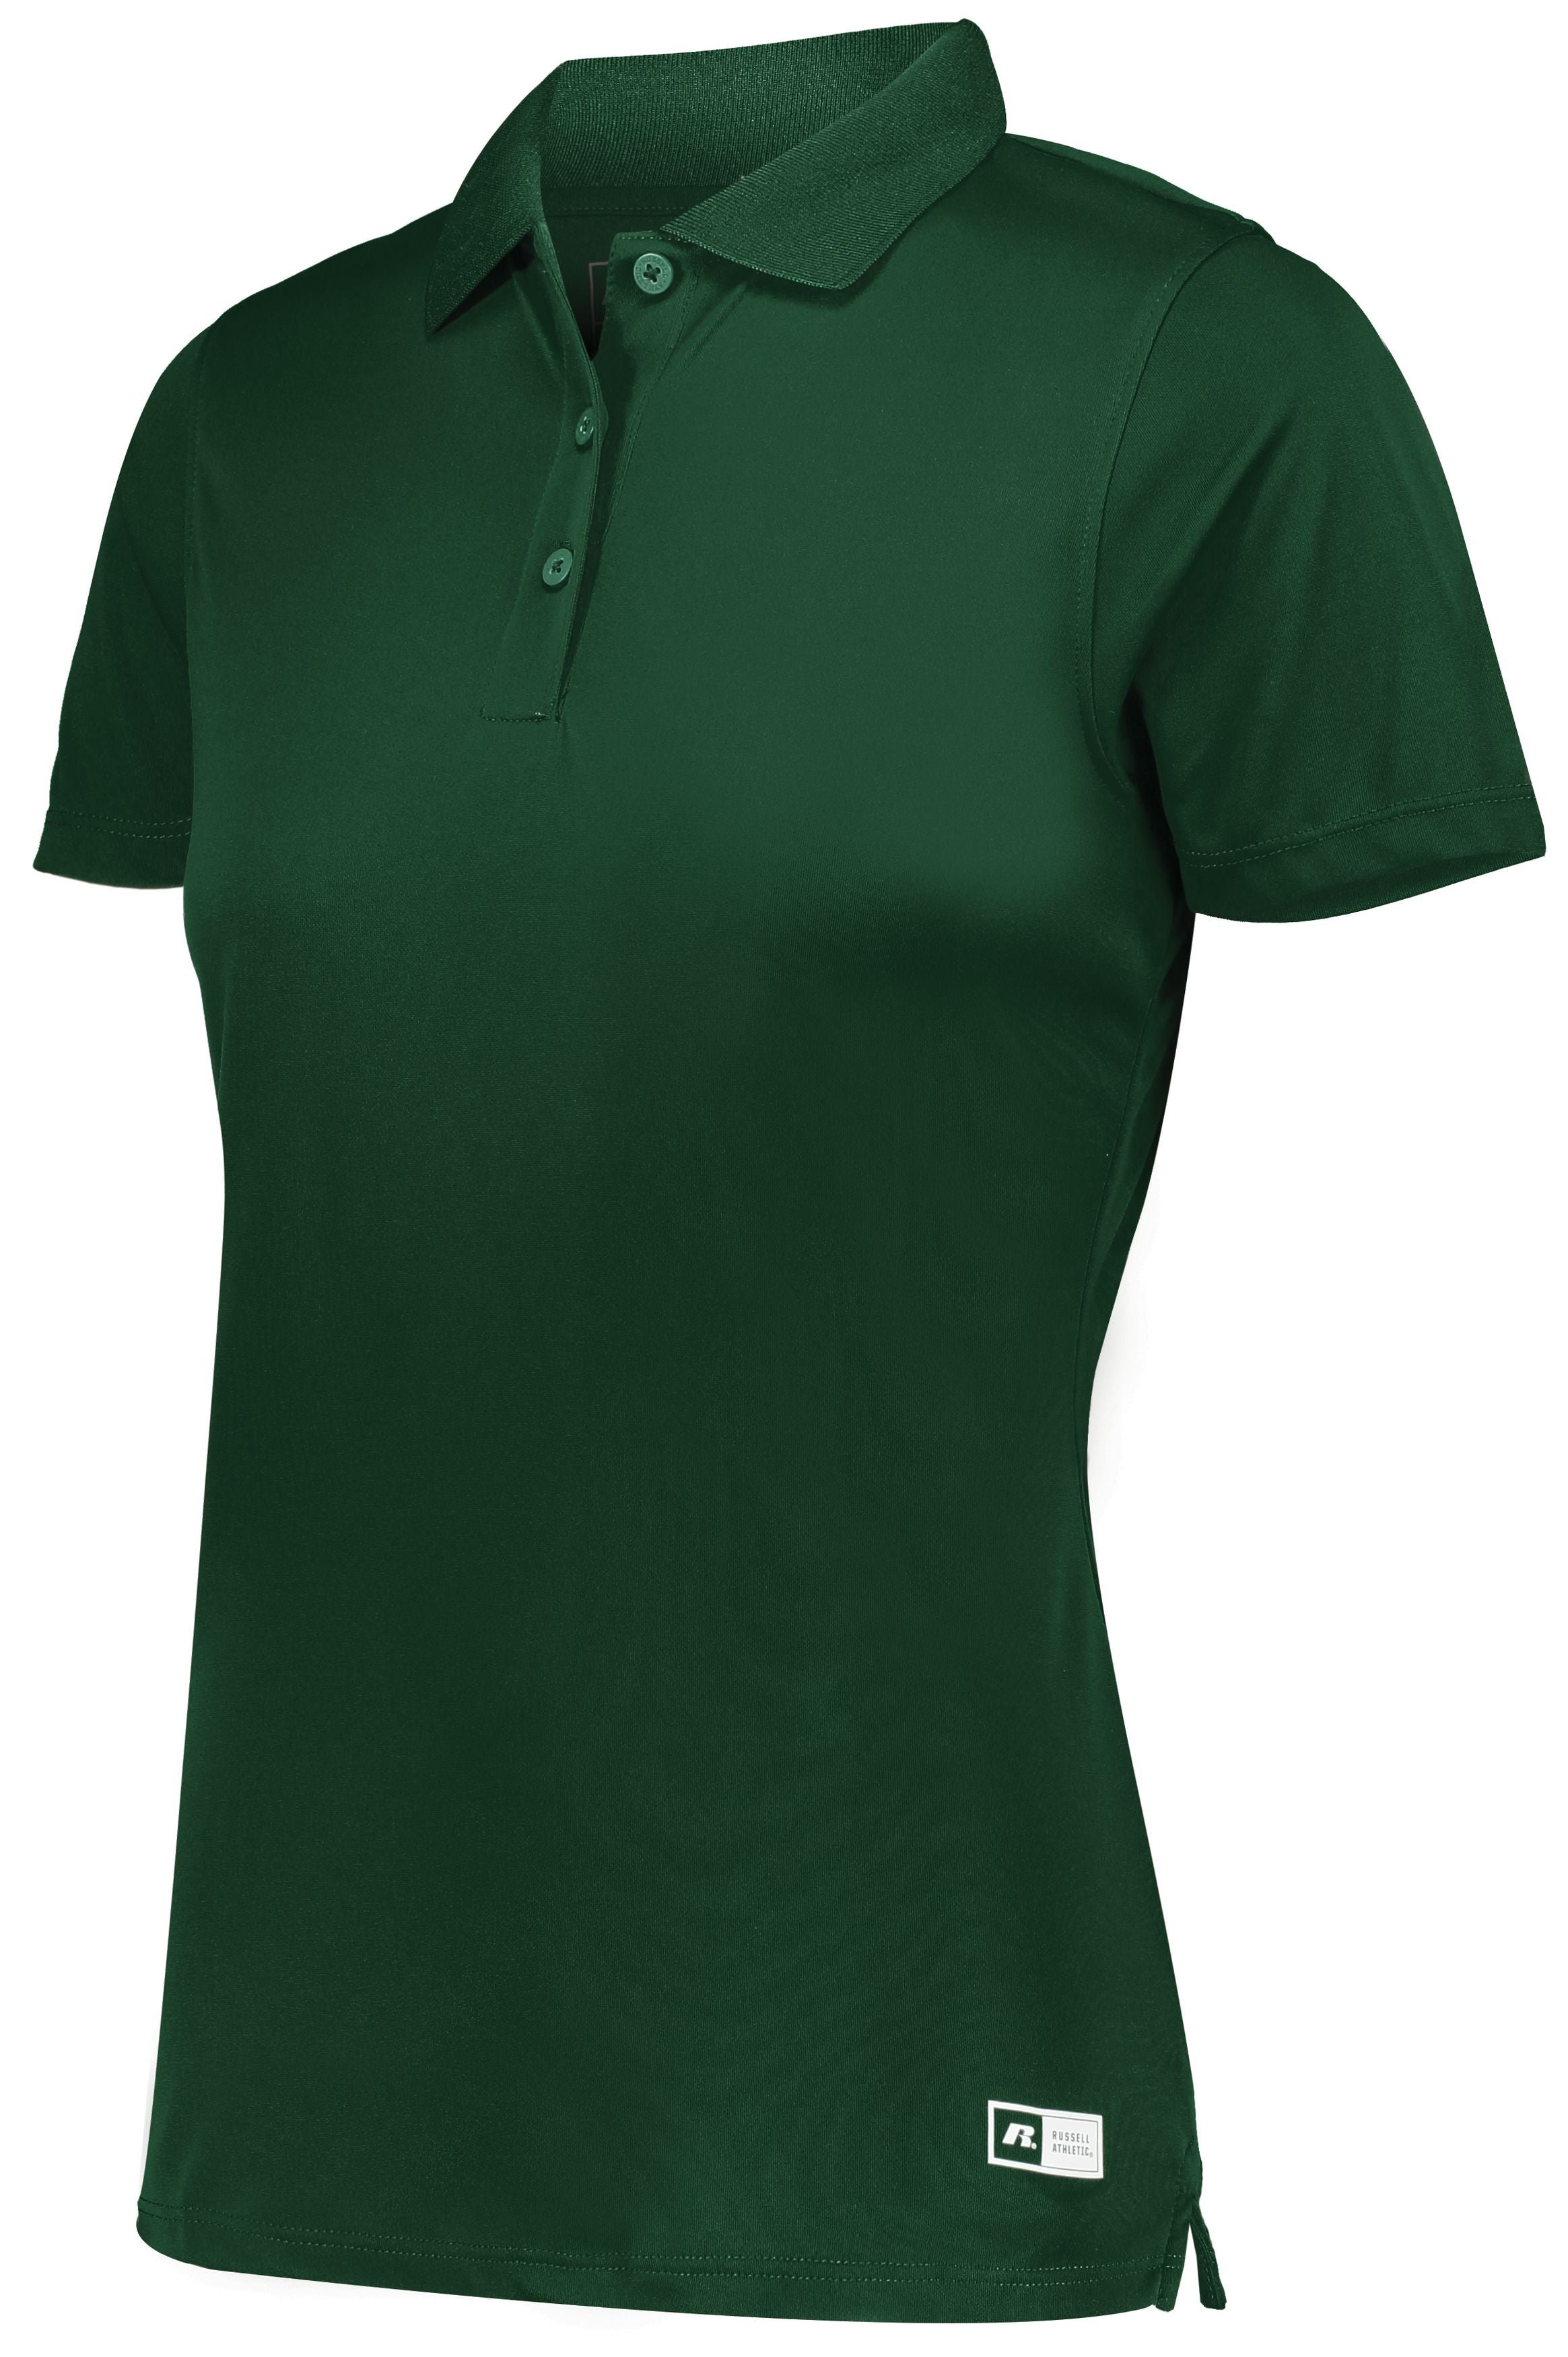 Russell Athletic Ladies Essential Polo in Dark Green  -Part of the Ladies, Ladies-Polo, Polos, Russell-Athletic-Products, Shirts, Corporate-Collection product lines at KanaleyCreations.com